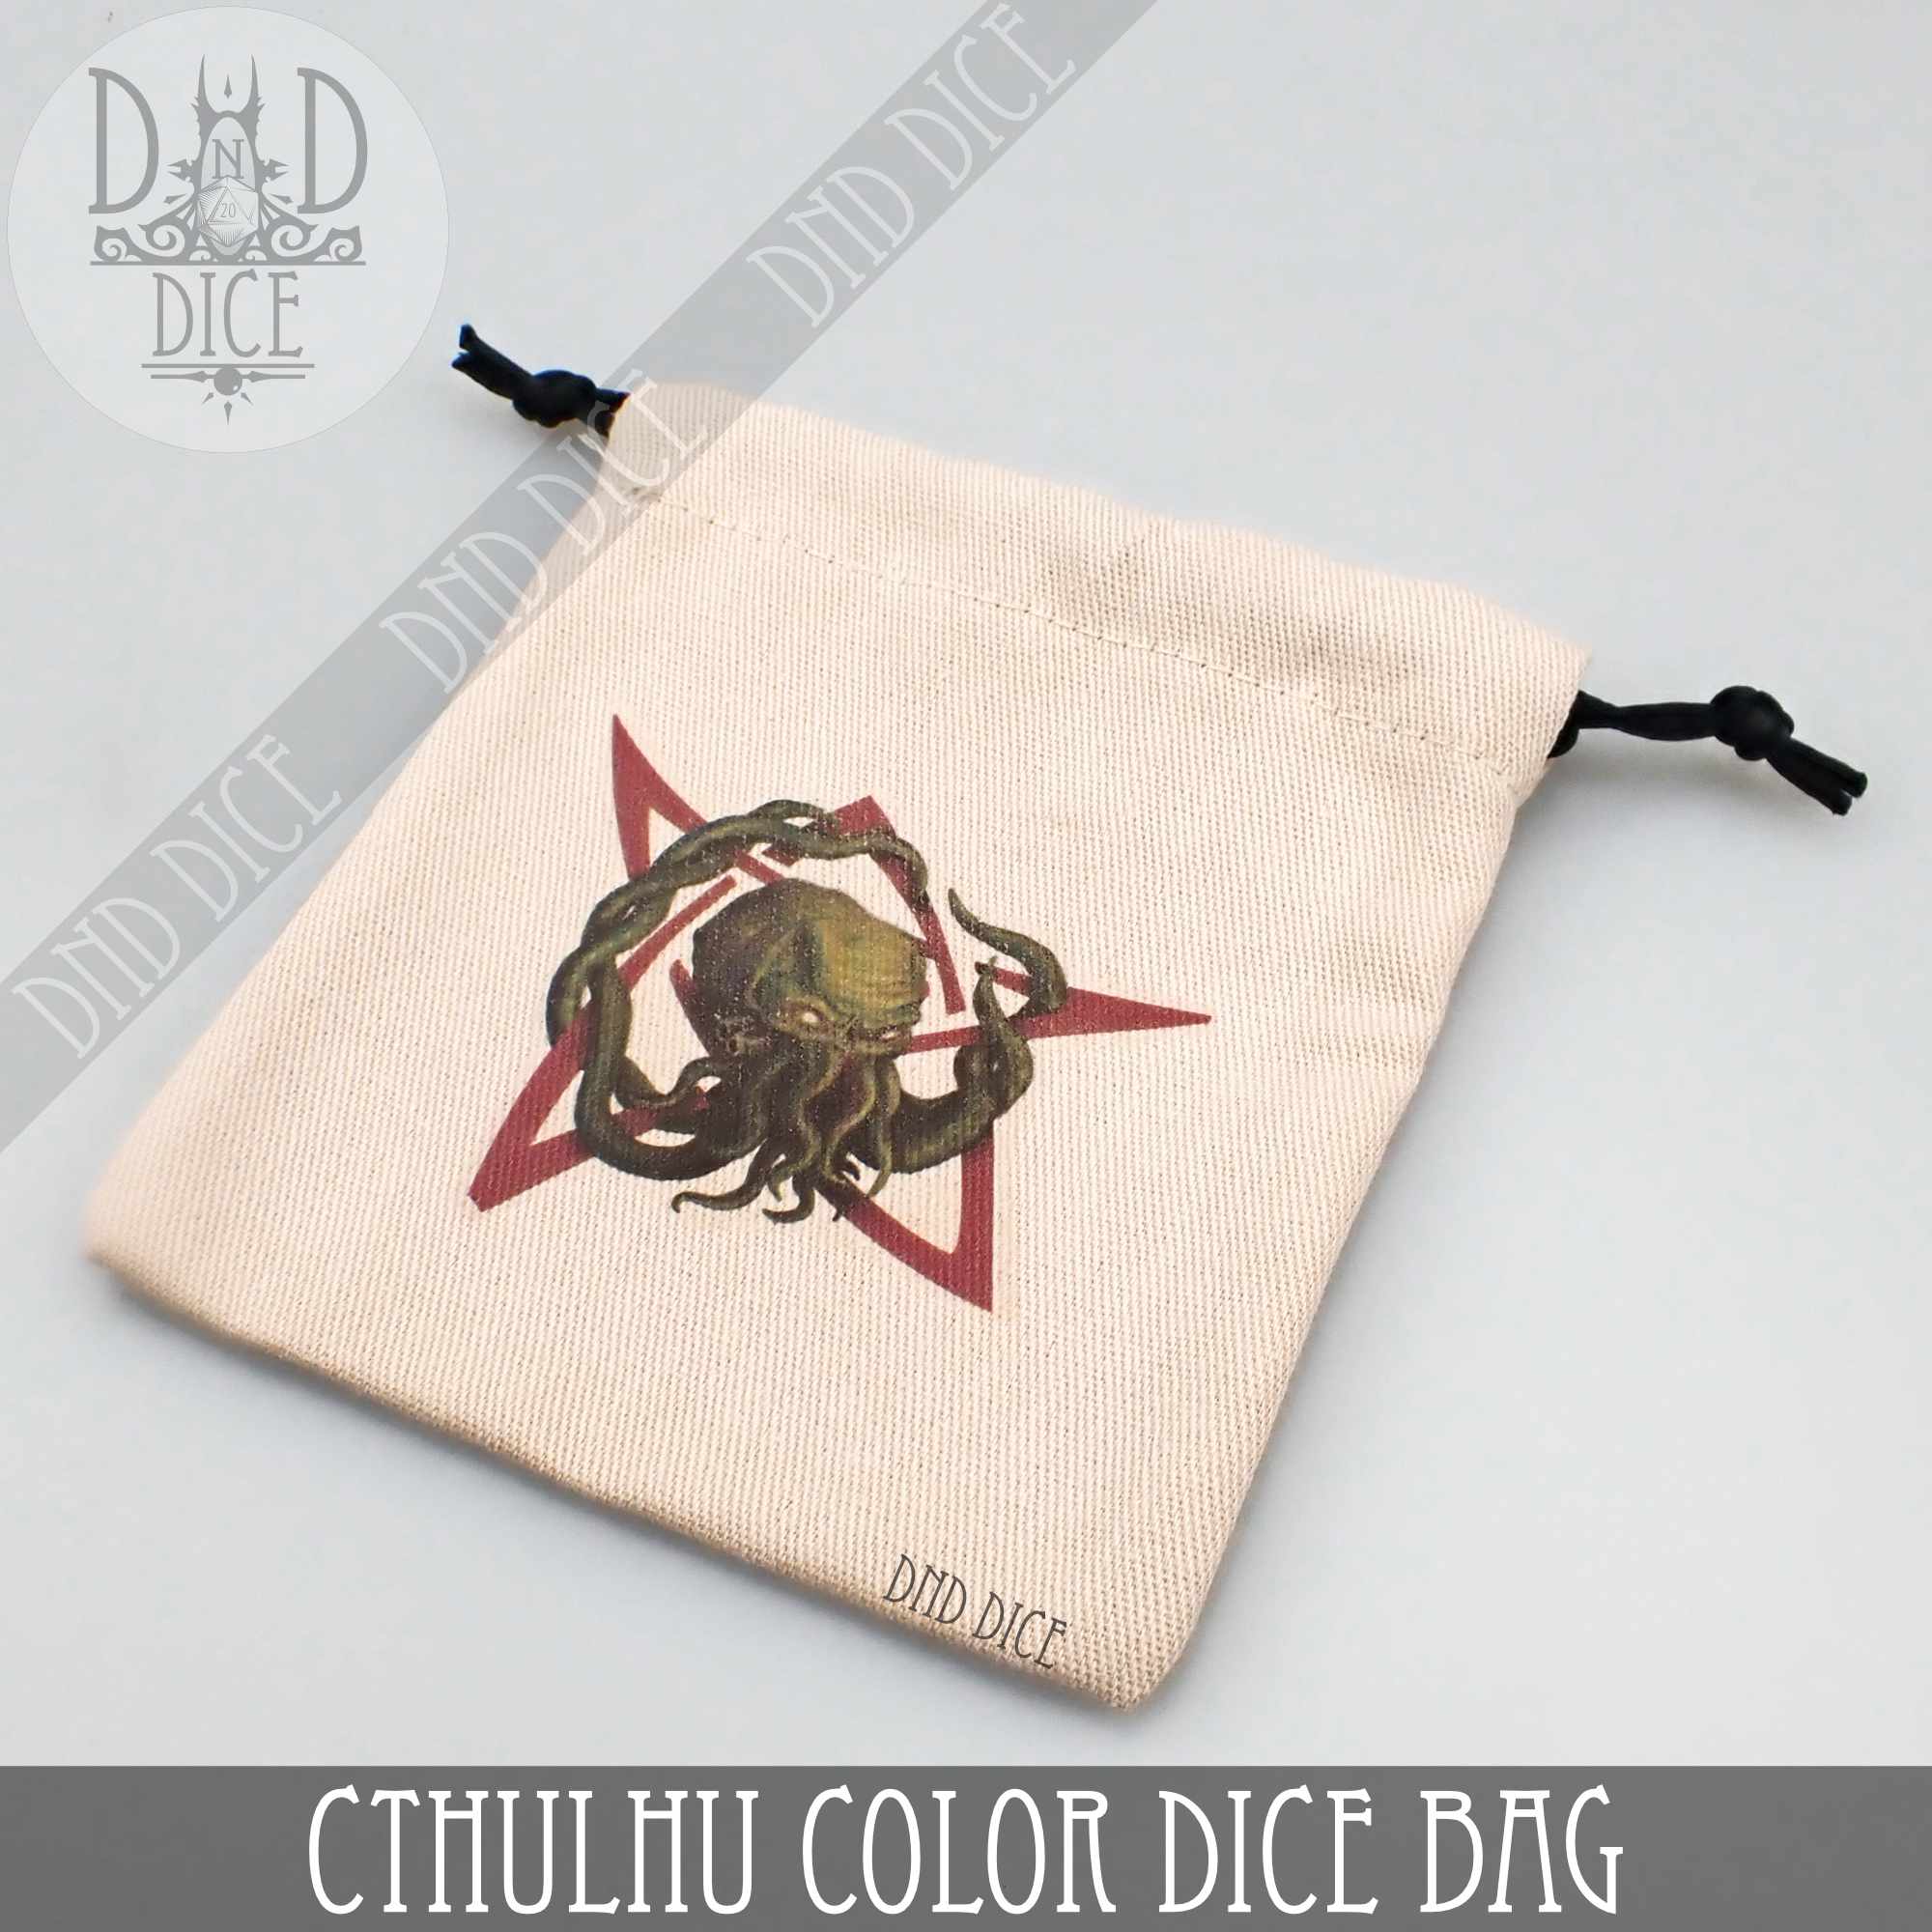 Call of Cthulhu COLOR Dice Bag